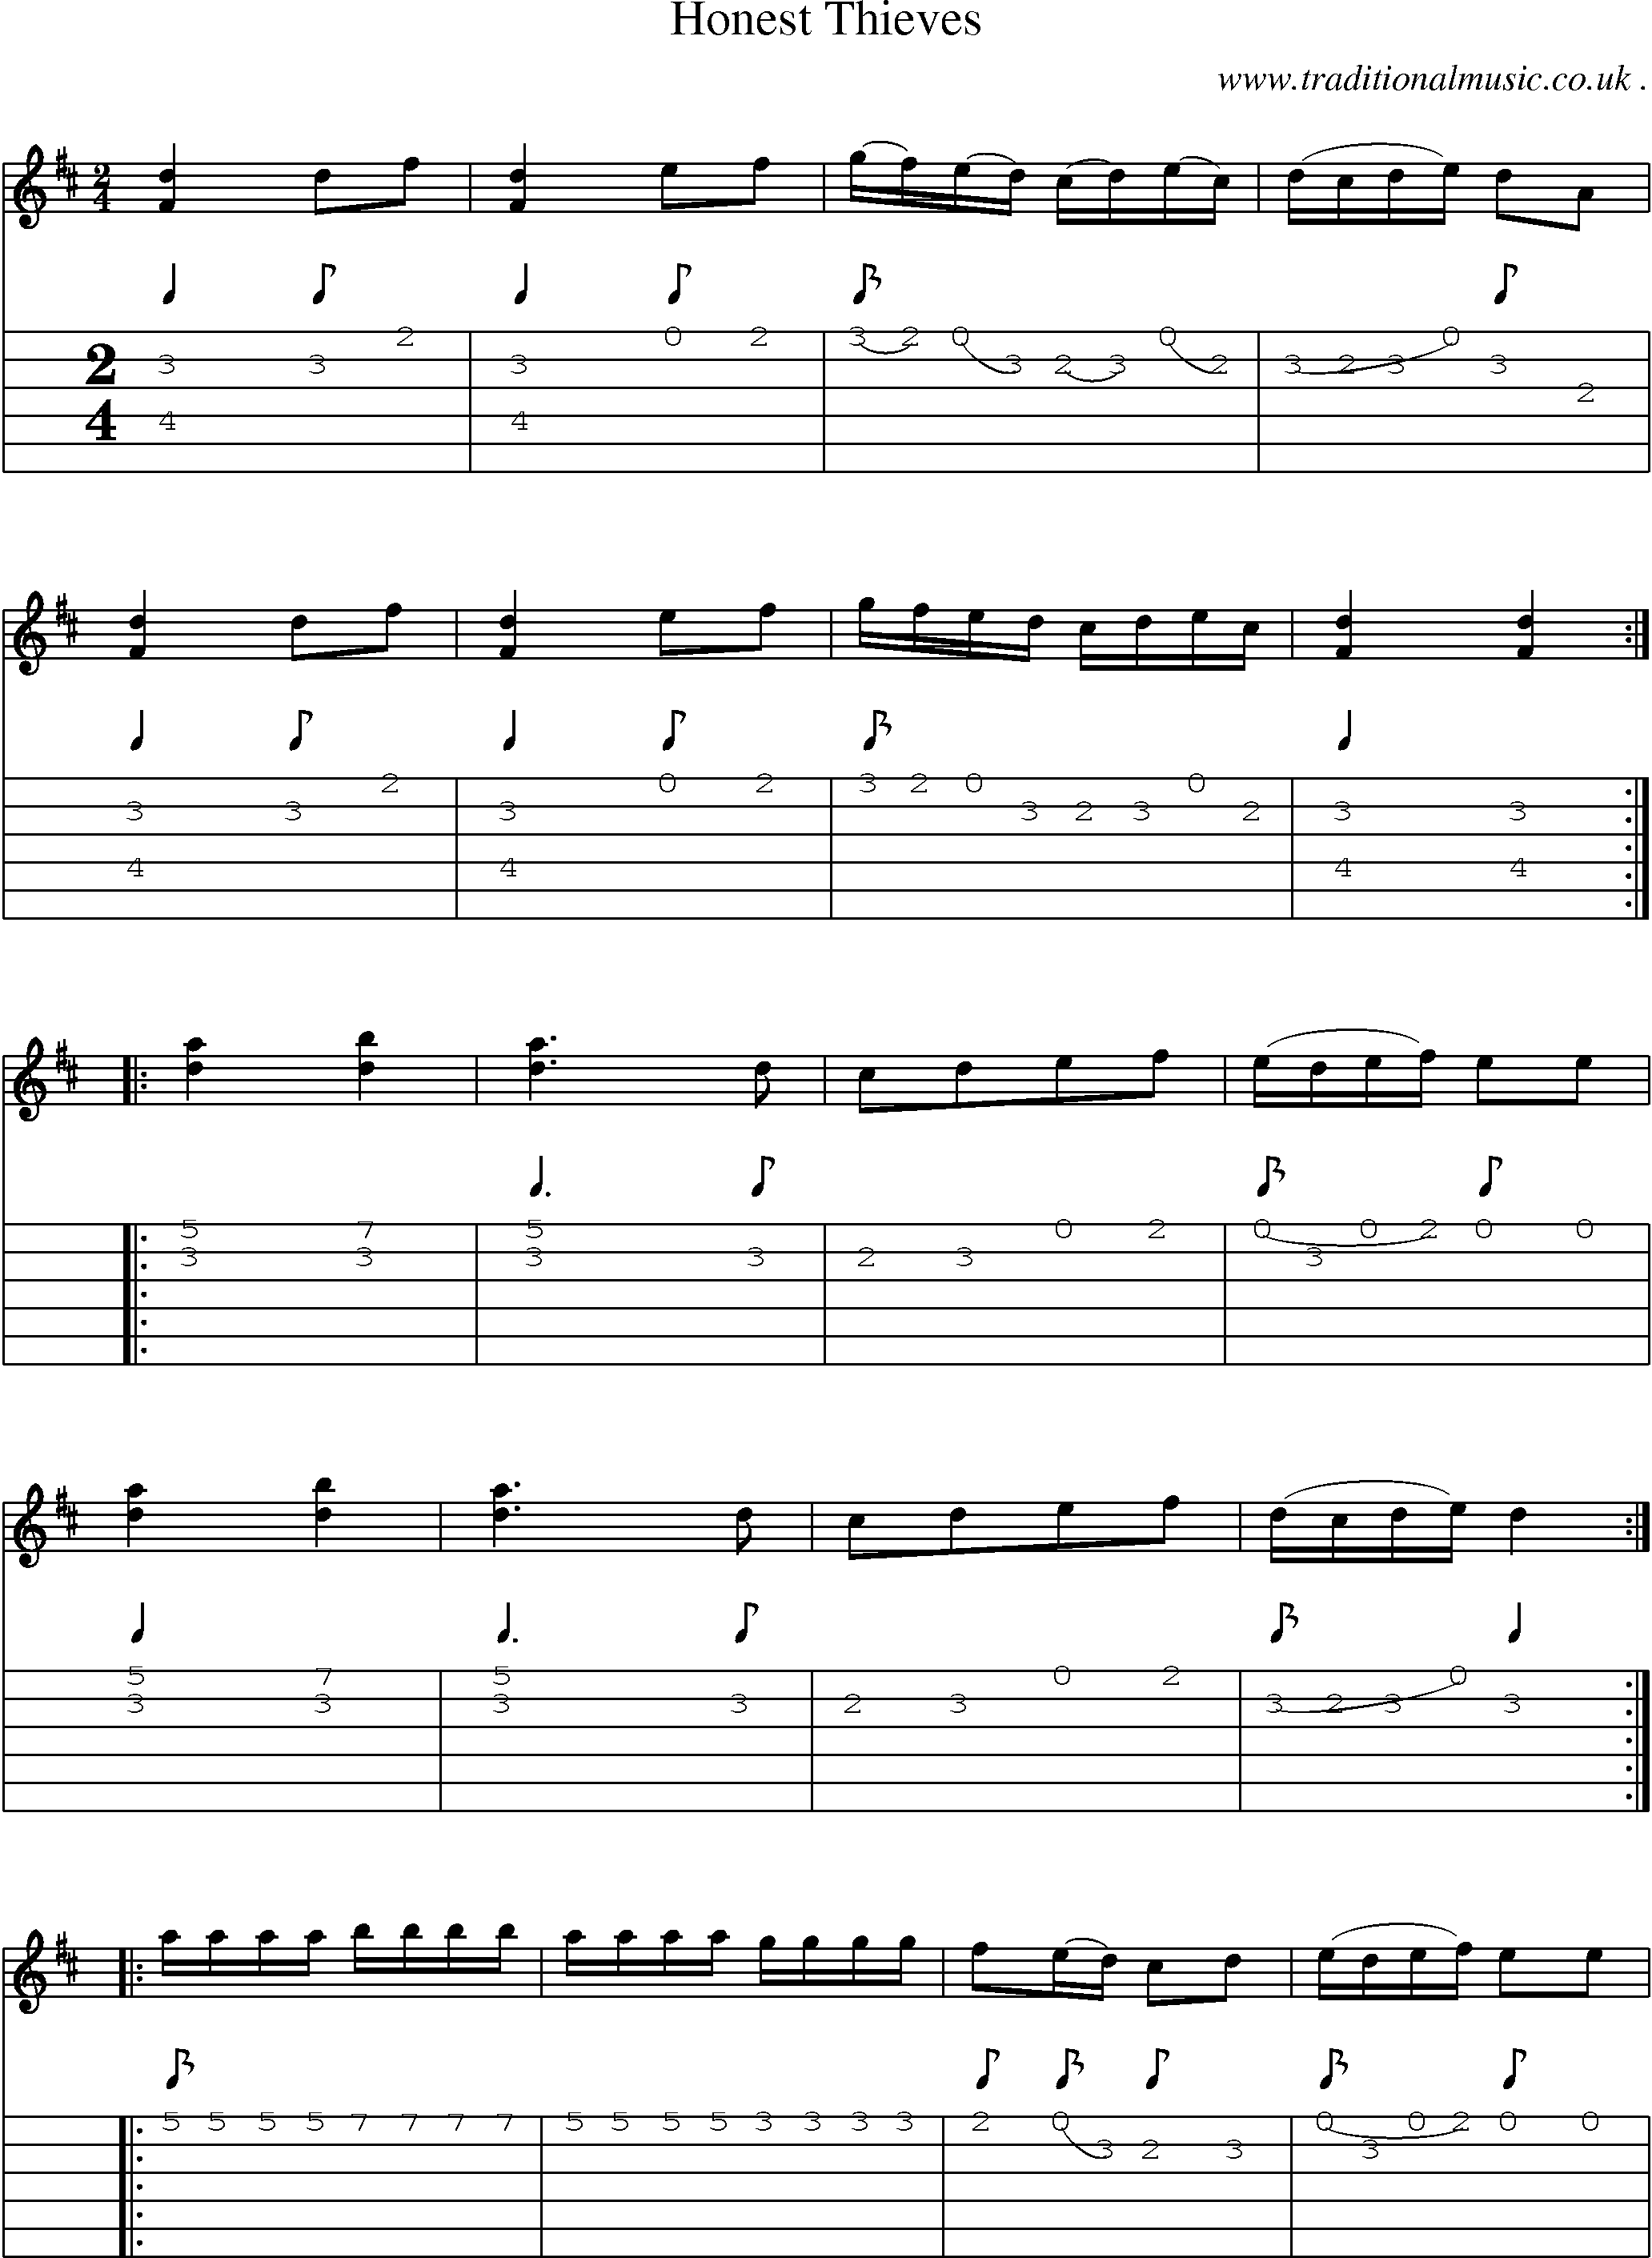 Sheet-Music and Guitar Tabs for Honest Thieves